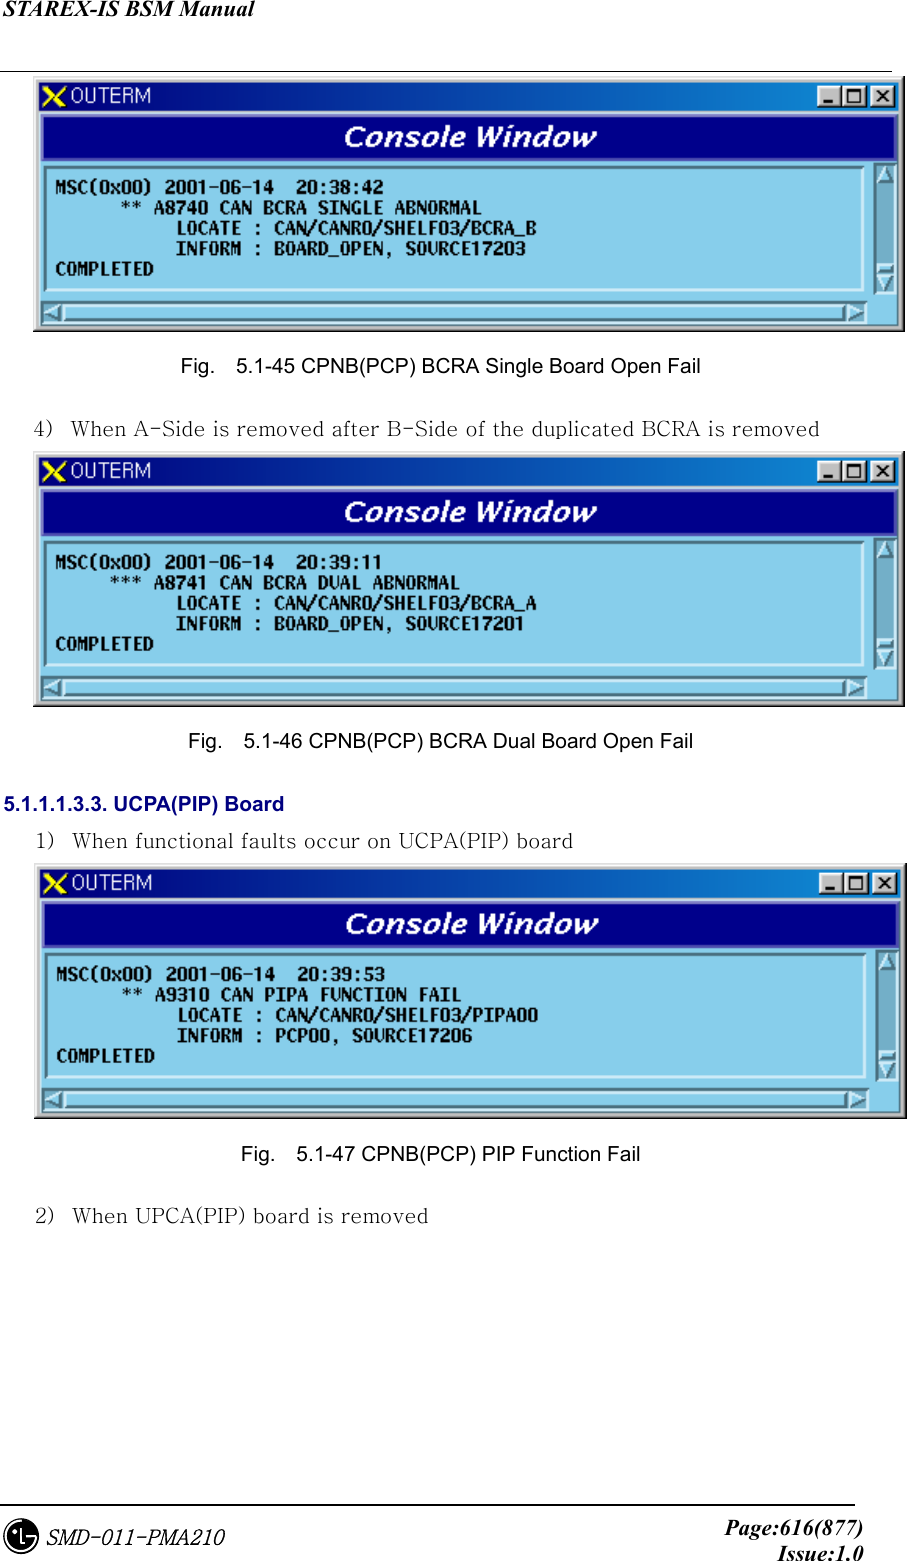 STAREX-IS BSM Manual     Page:616(877)Issue:1.0SMD-011-PMA210  Fig.  5.1-45 CPNB(PCP) BCRA Single Board Open Fail 4)  When A-Side is removed after B-Side of the duplicated BCRA is removed  Fig.  5.1-46 CPNB(PCP) BCRA Dual Board Open Fail 5.1.1.1.3.3. UCPA(PIP) Board 1)  When functional faults occur on UCPA(PIP) board  Fig.    5.1-47 CPNB(PCP) PIP Function Fail 2)  When UPCA(PIP) board is removed 